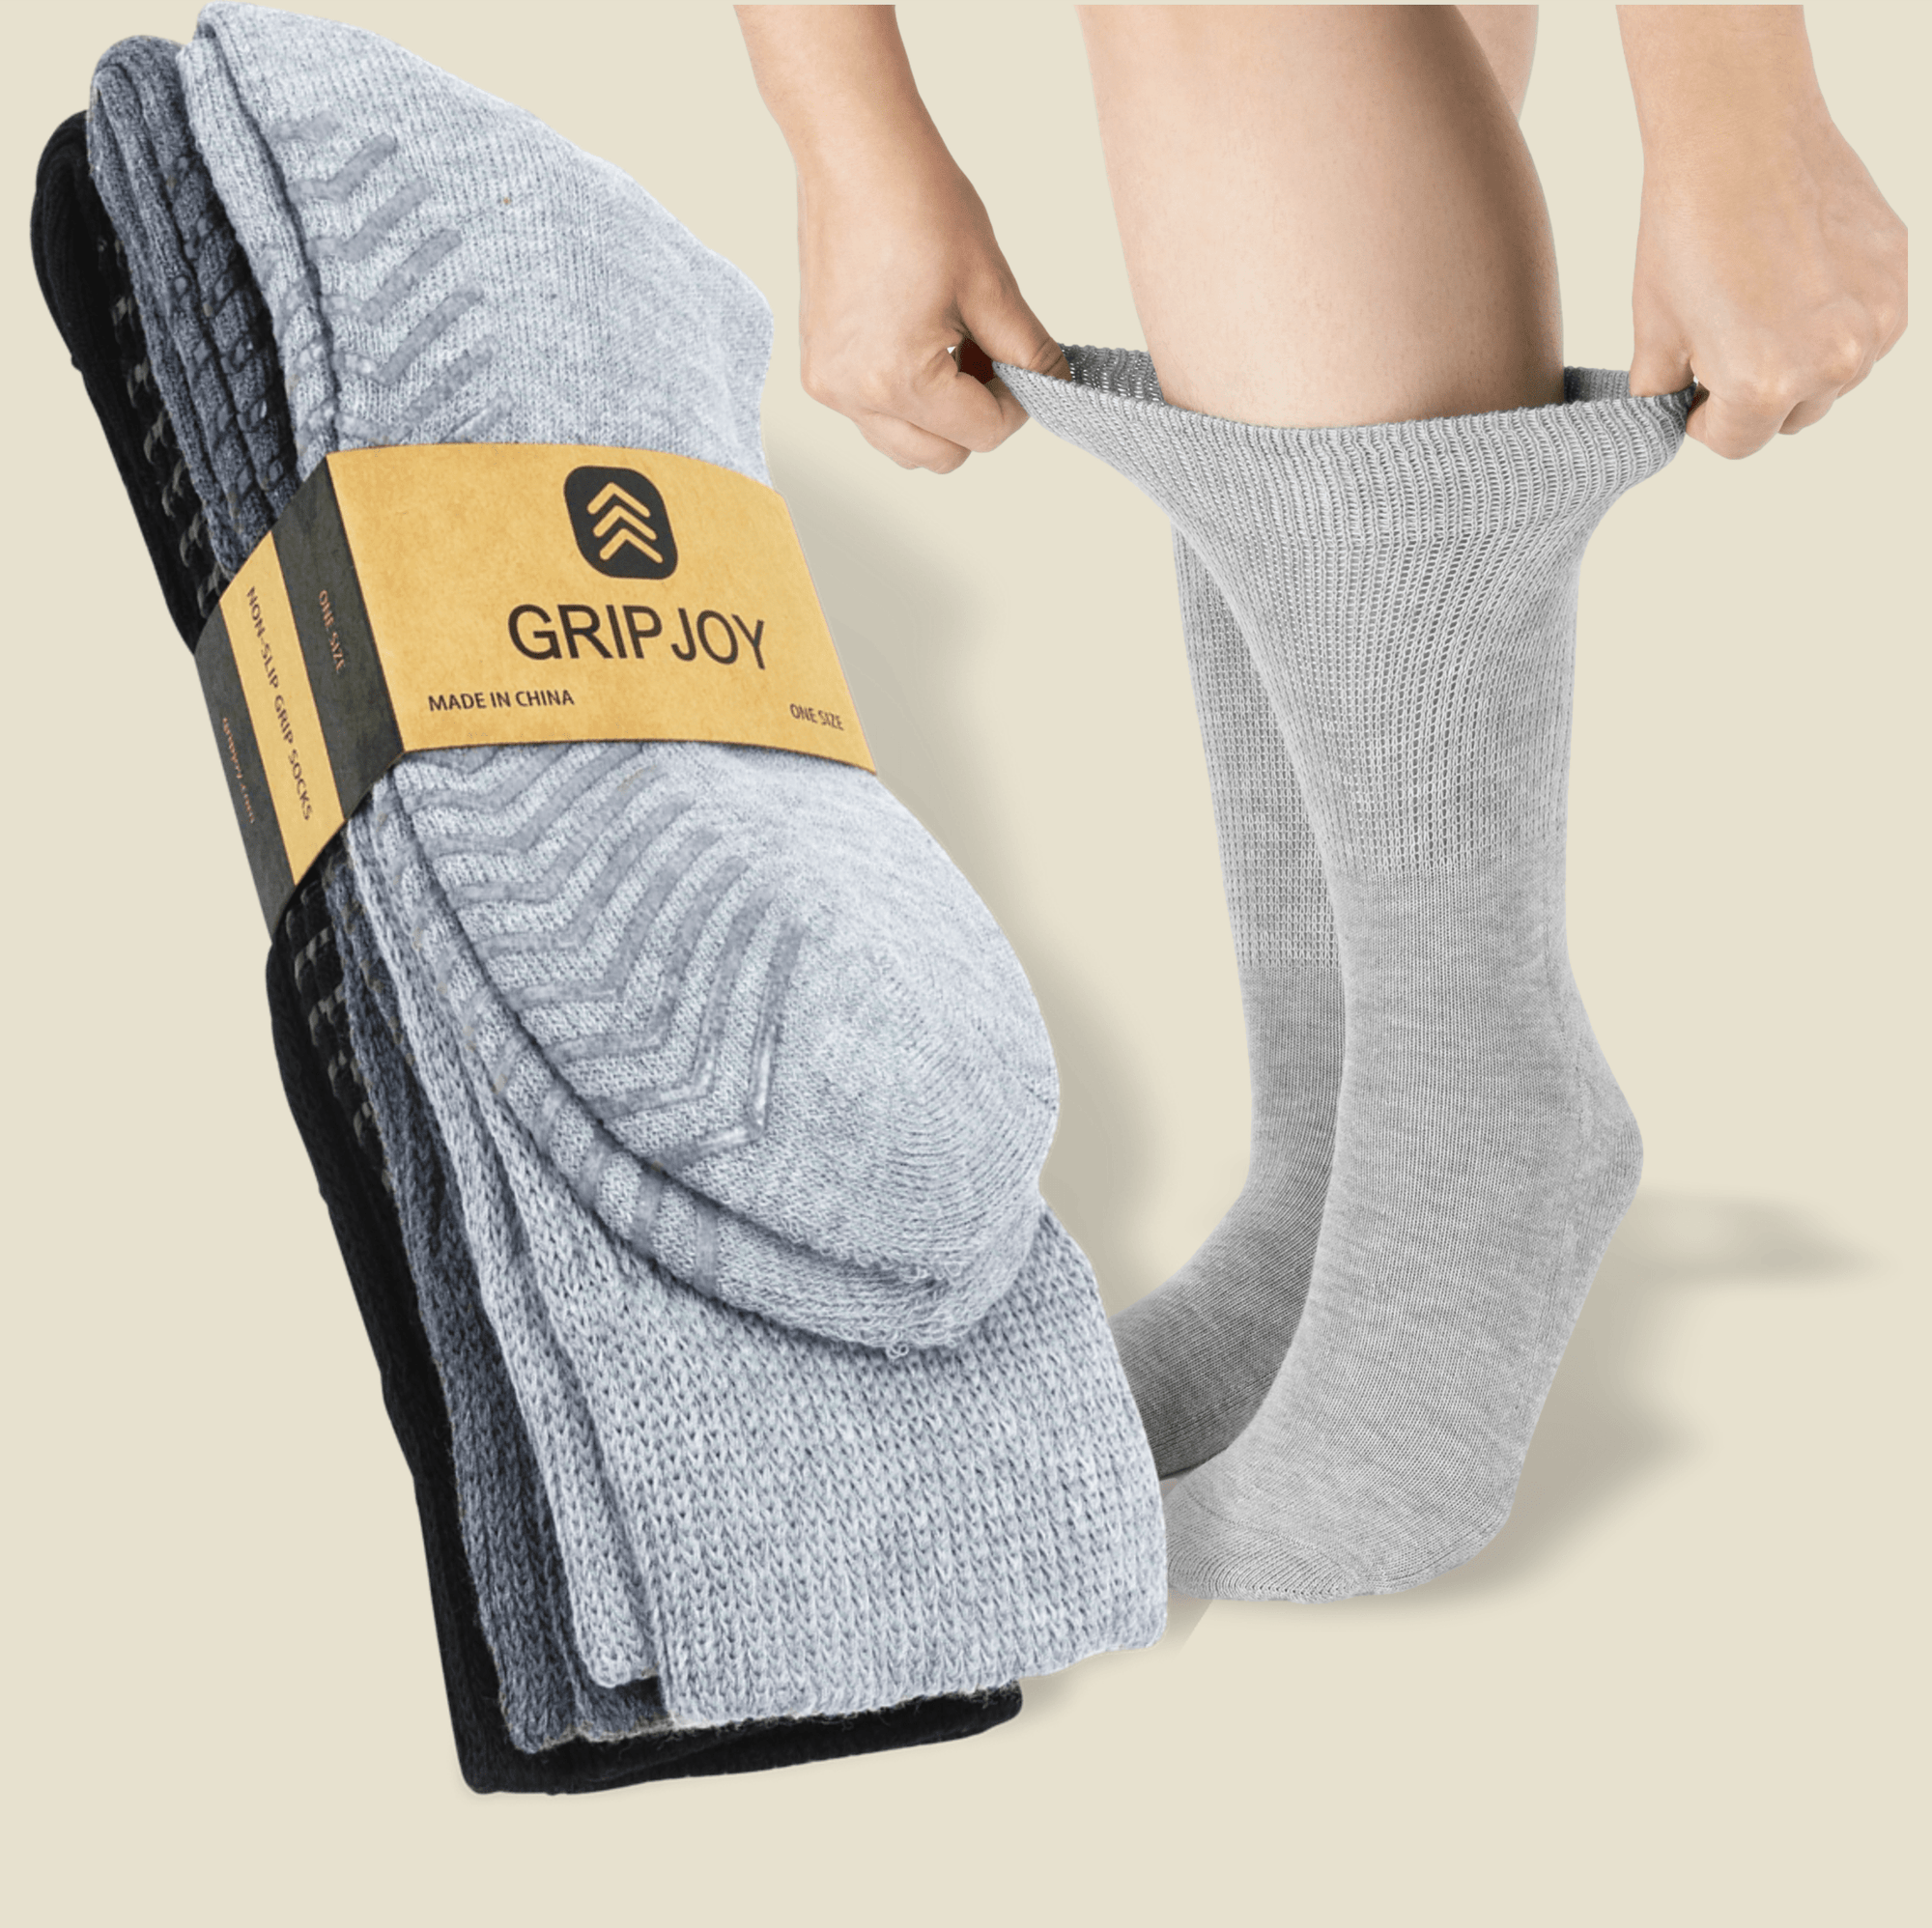 Diabetic Socks with Grips for Women and Men - 4 Pairs | Neuropathy Socks  for Women | Hospital Socks with Grips for Women | Ankle Diabetic Non Slip